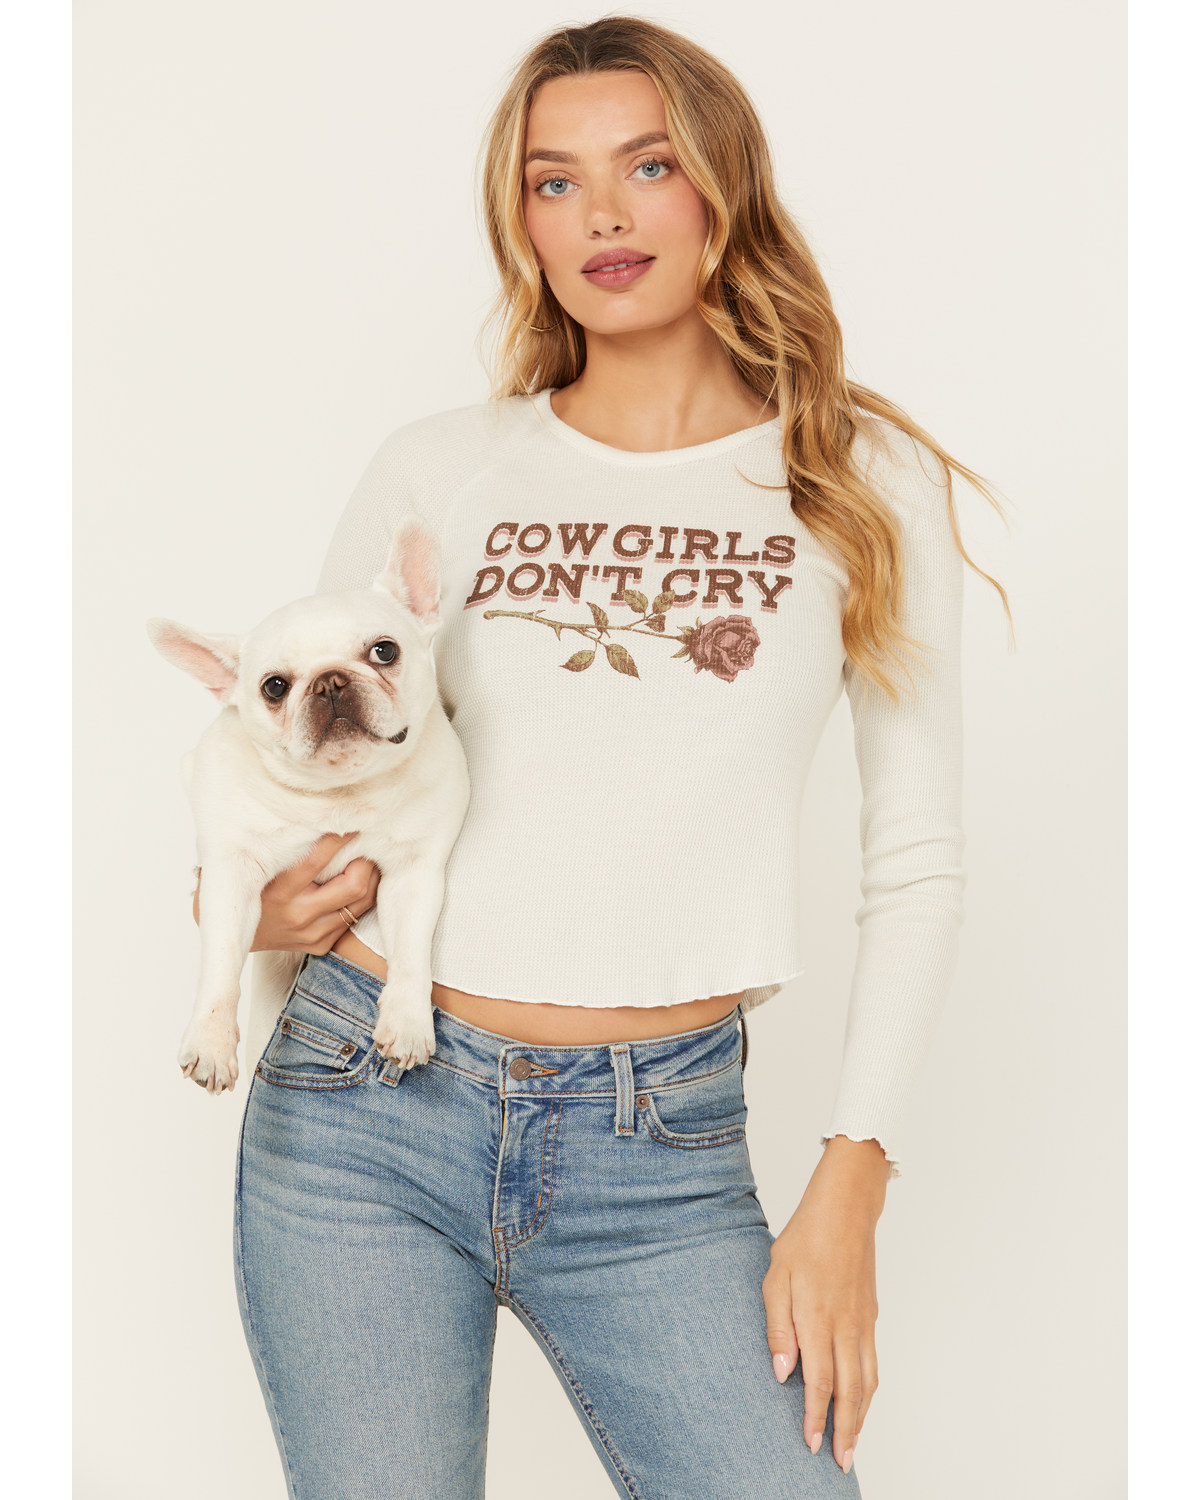 La Land Women's Cowgirls Don't Cry Long Sleeve Thermal Graphic Tee